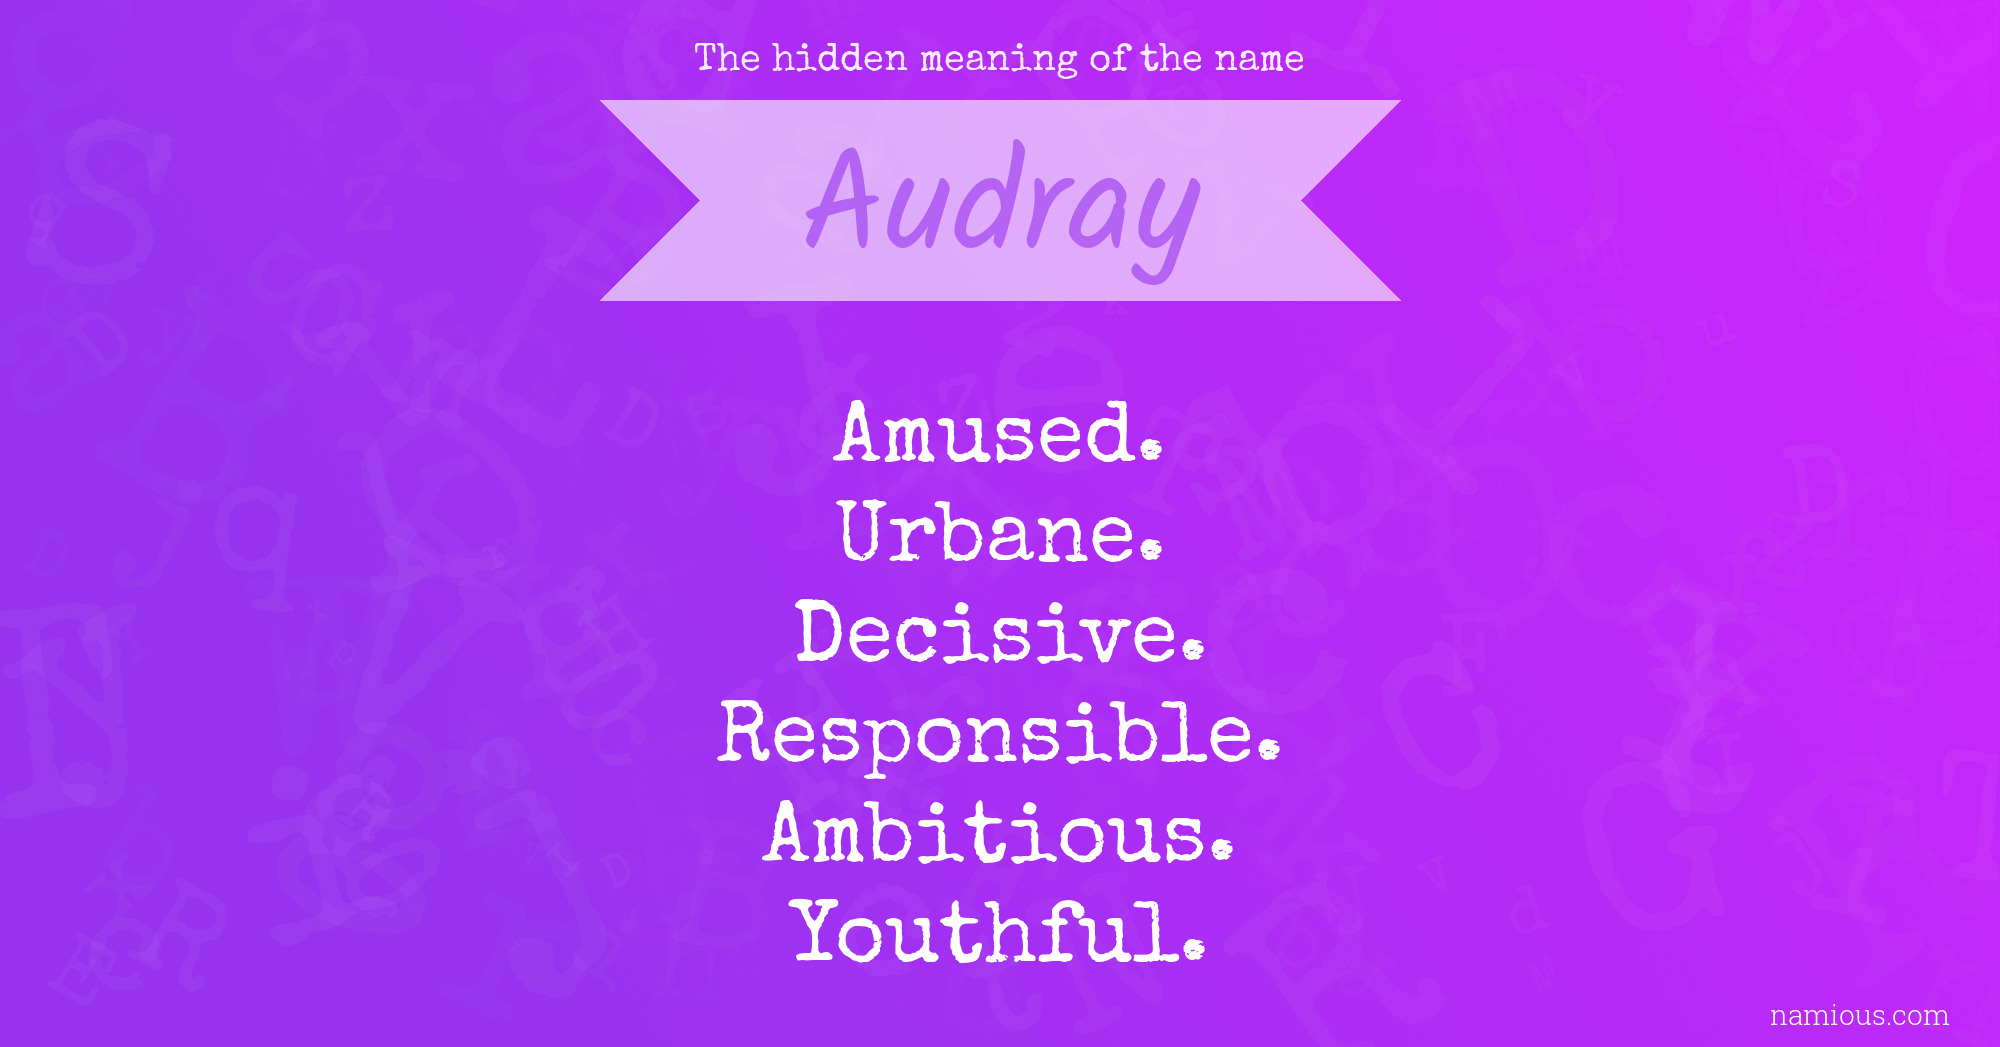 The hidden meaning of the name Audray